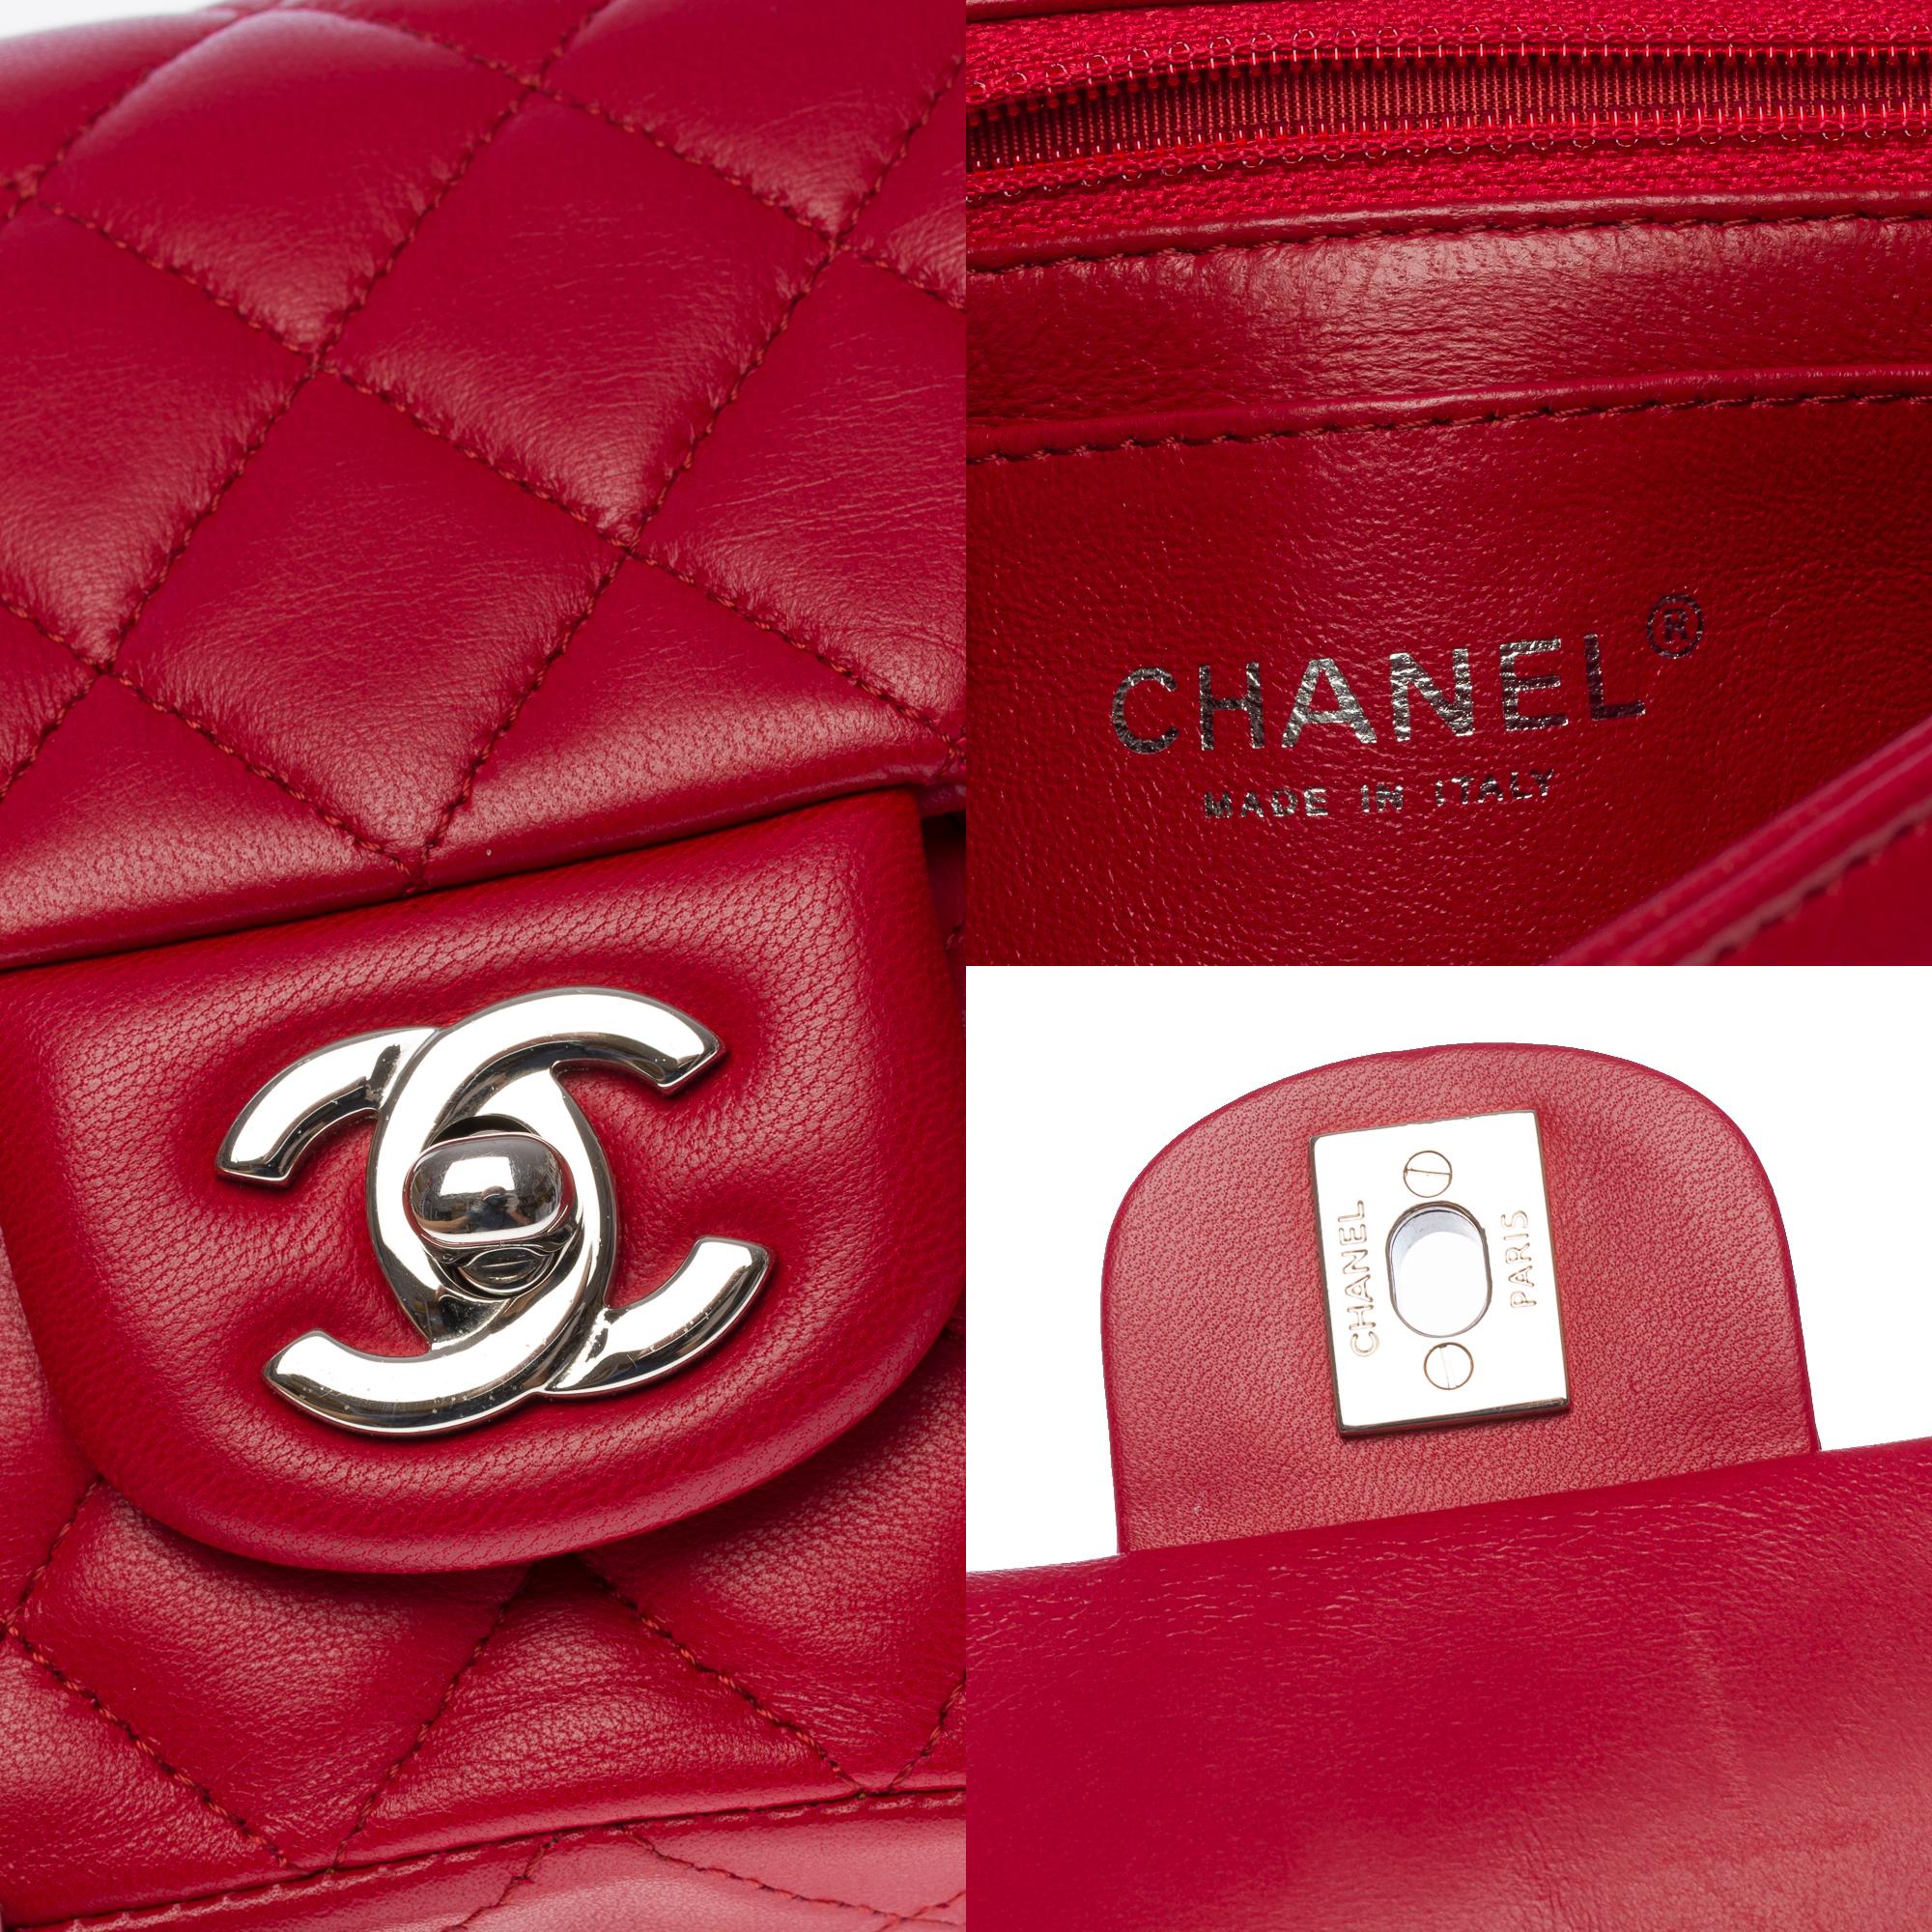 Stunning Chanel Timeless Mini Flap shoulder bag in Red quilted lamb leather, SHW 1